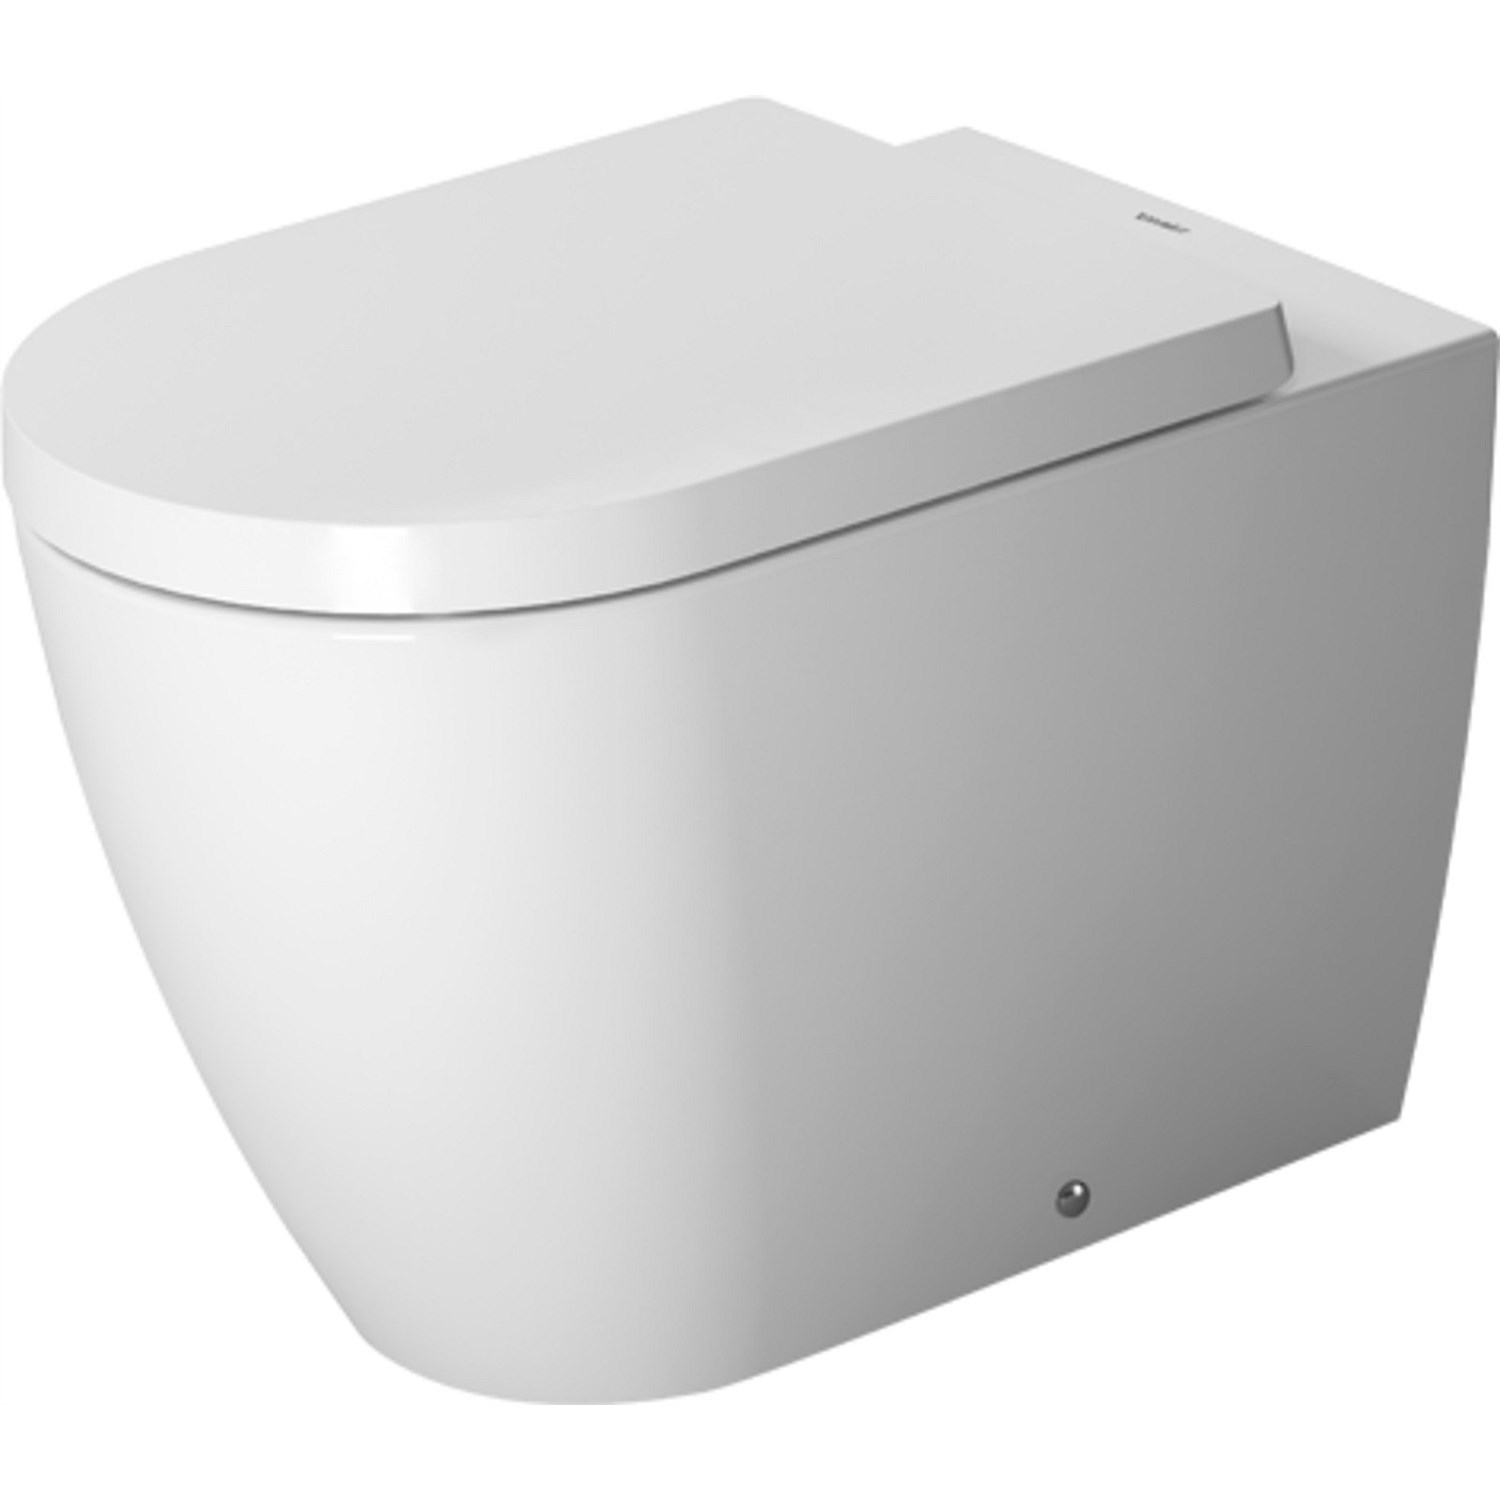 Back-to-wall - Duravit ME By Starck Floor-Mounted Toilet Suite